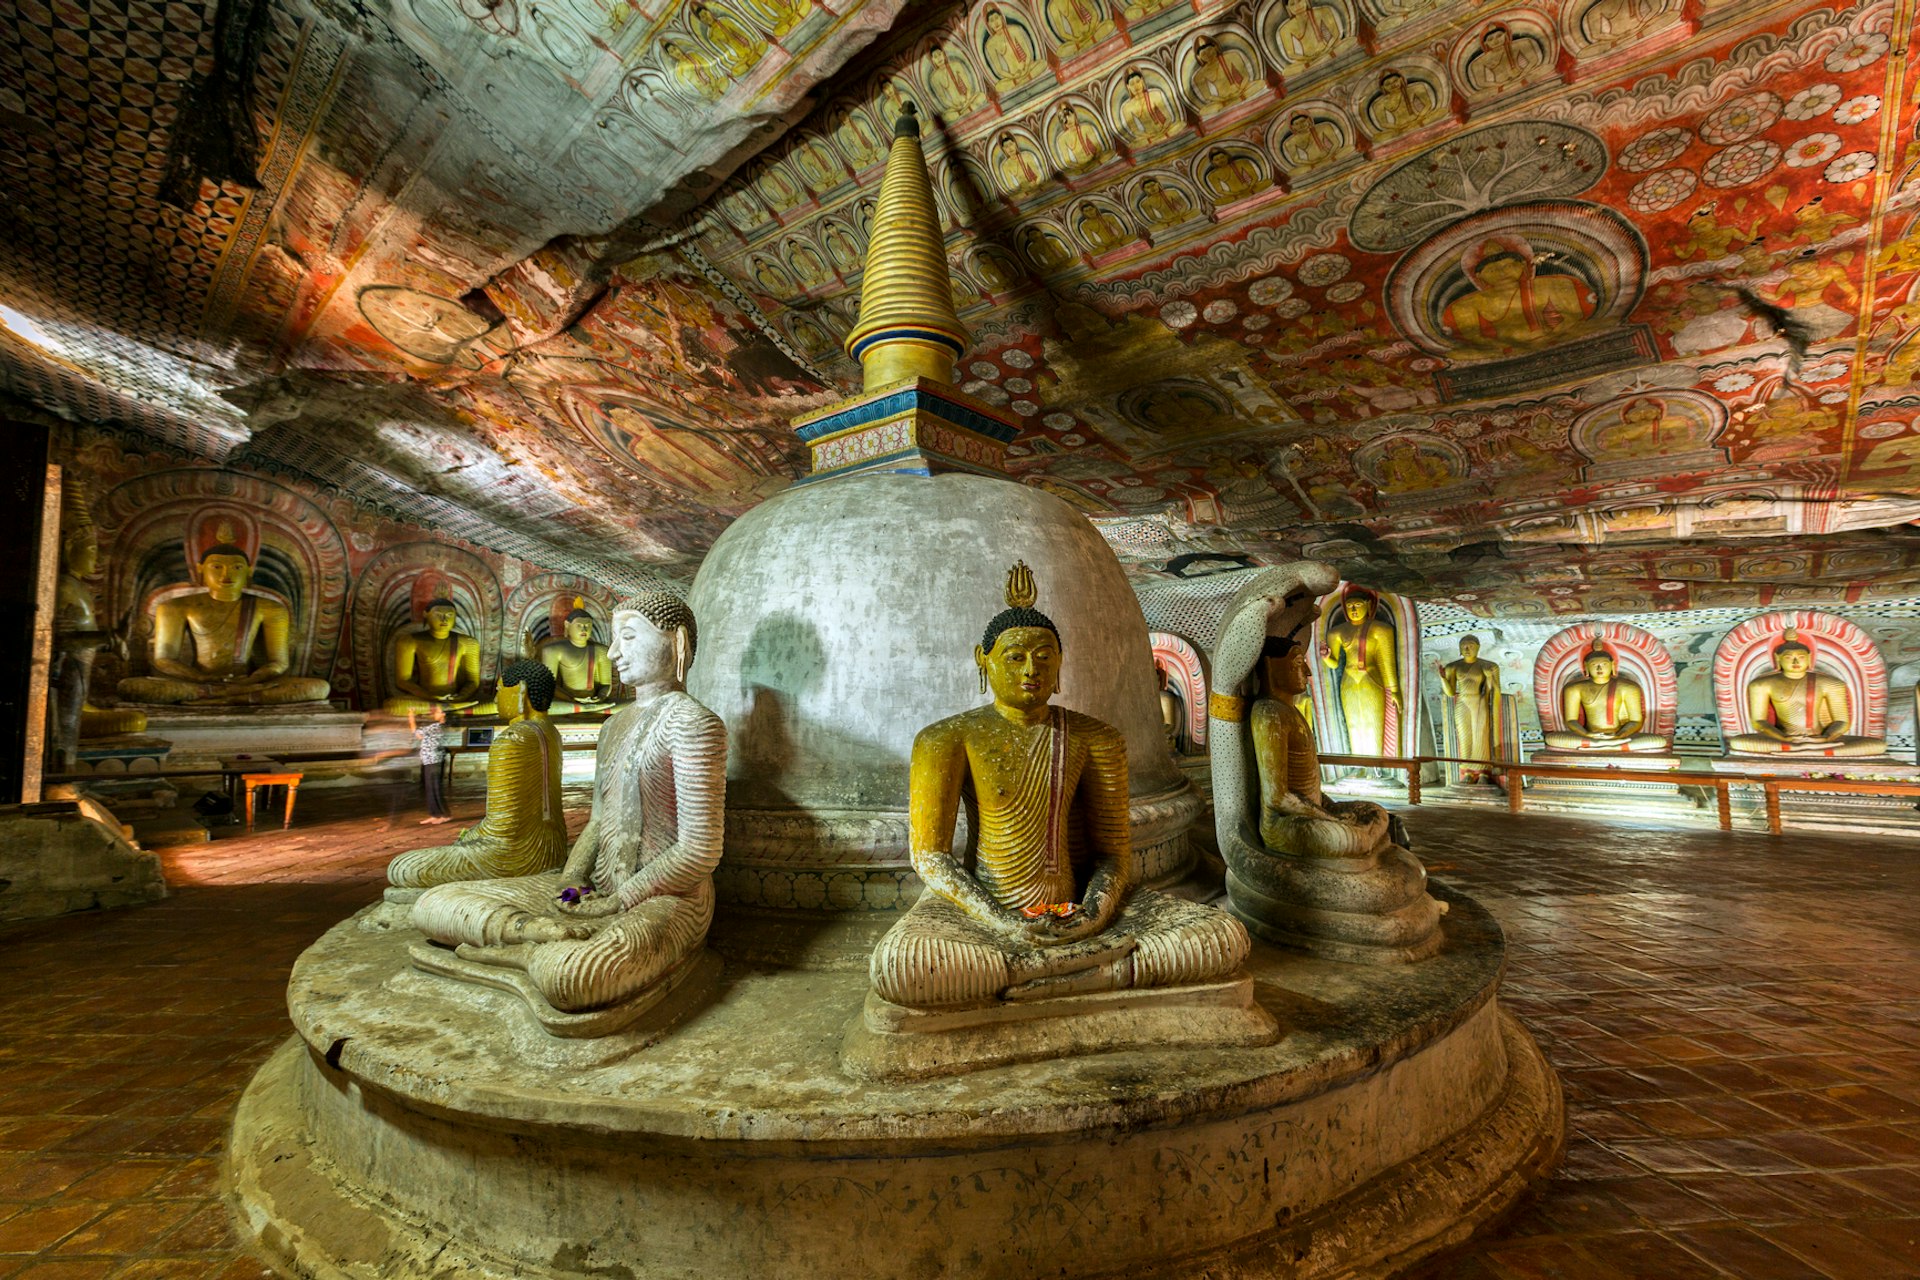 Buddha statues and colorful religious art in the dimly lit caves at Dambulla